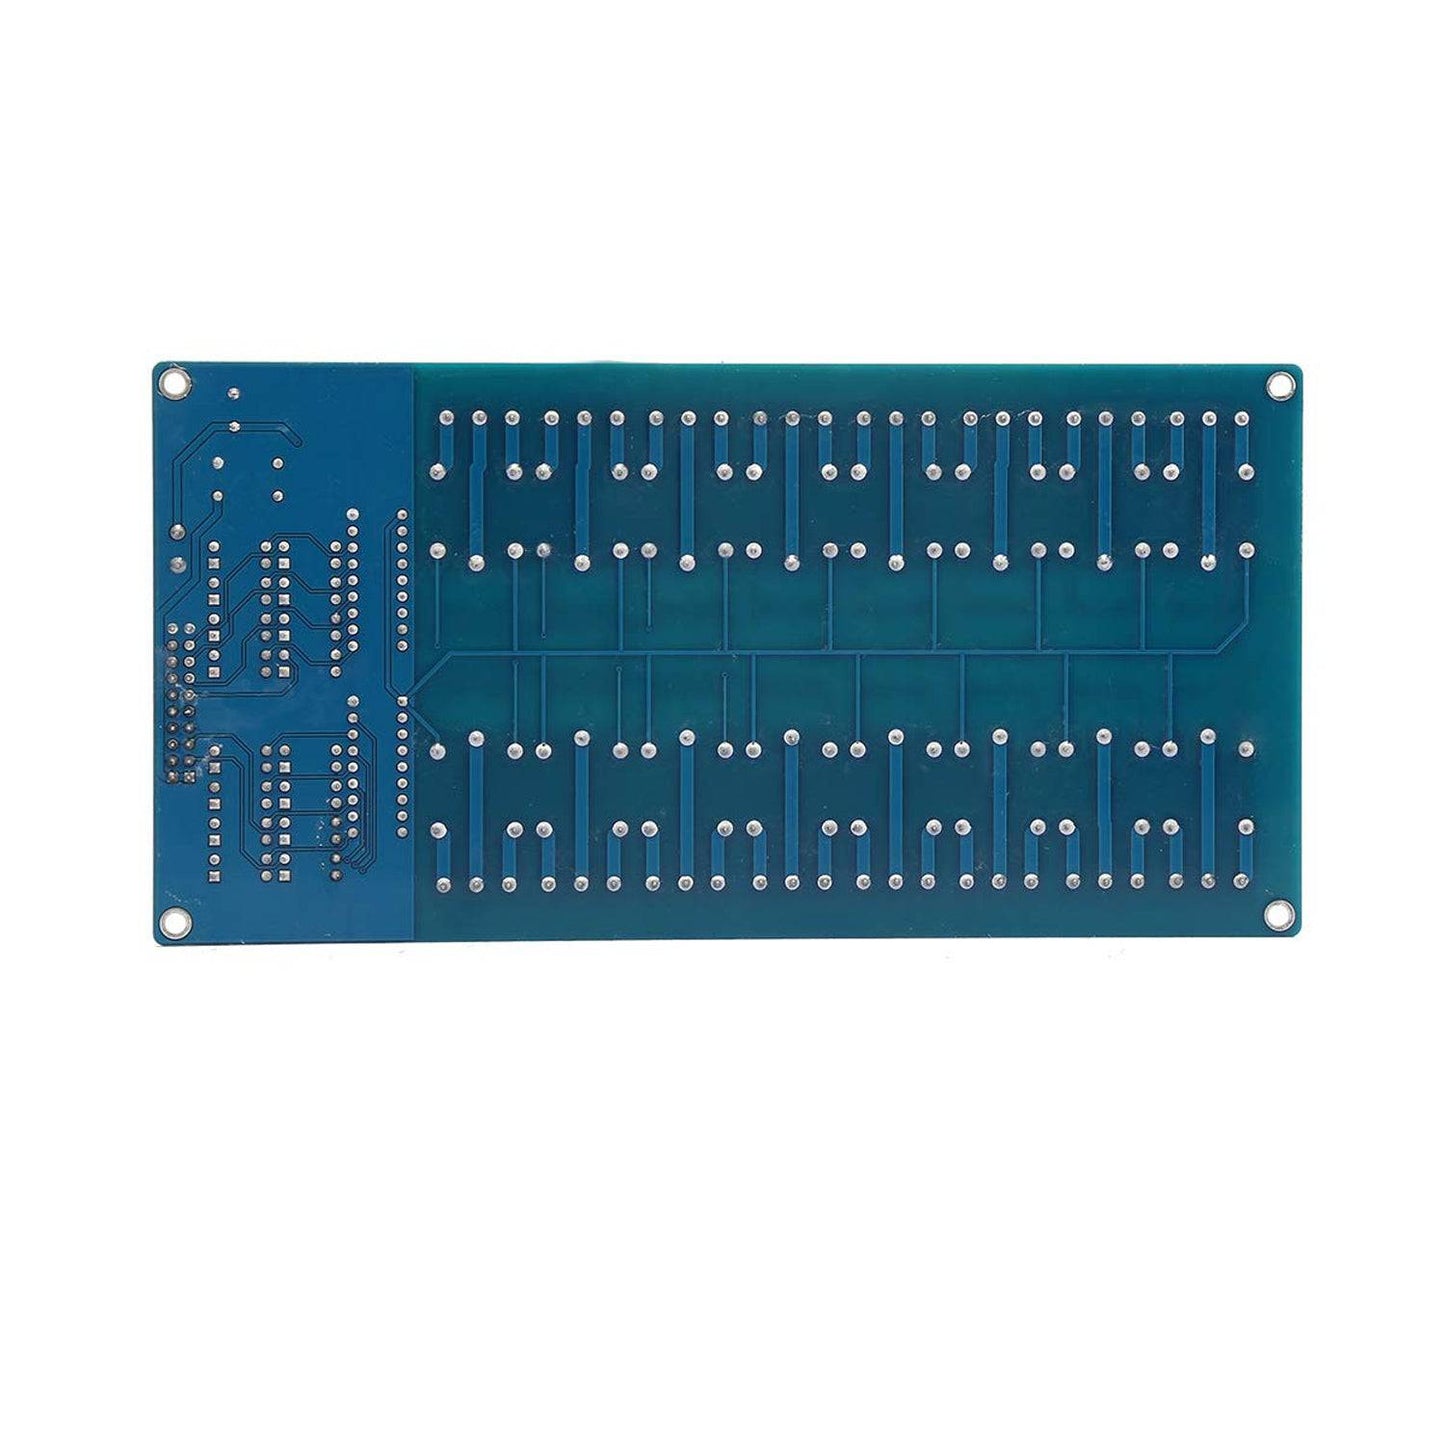 16 Channel 5V Relay Module with Light Coupling